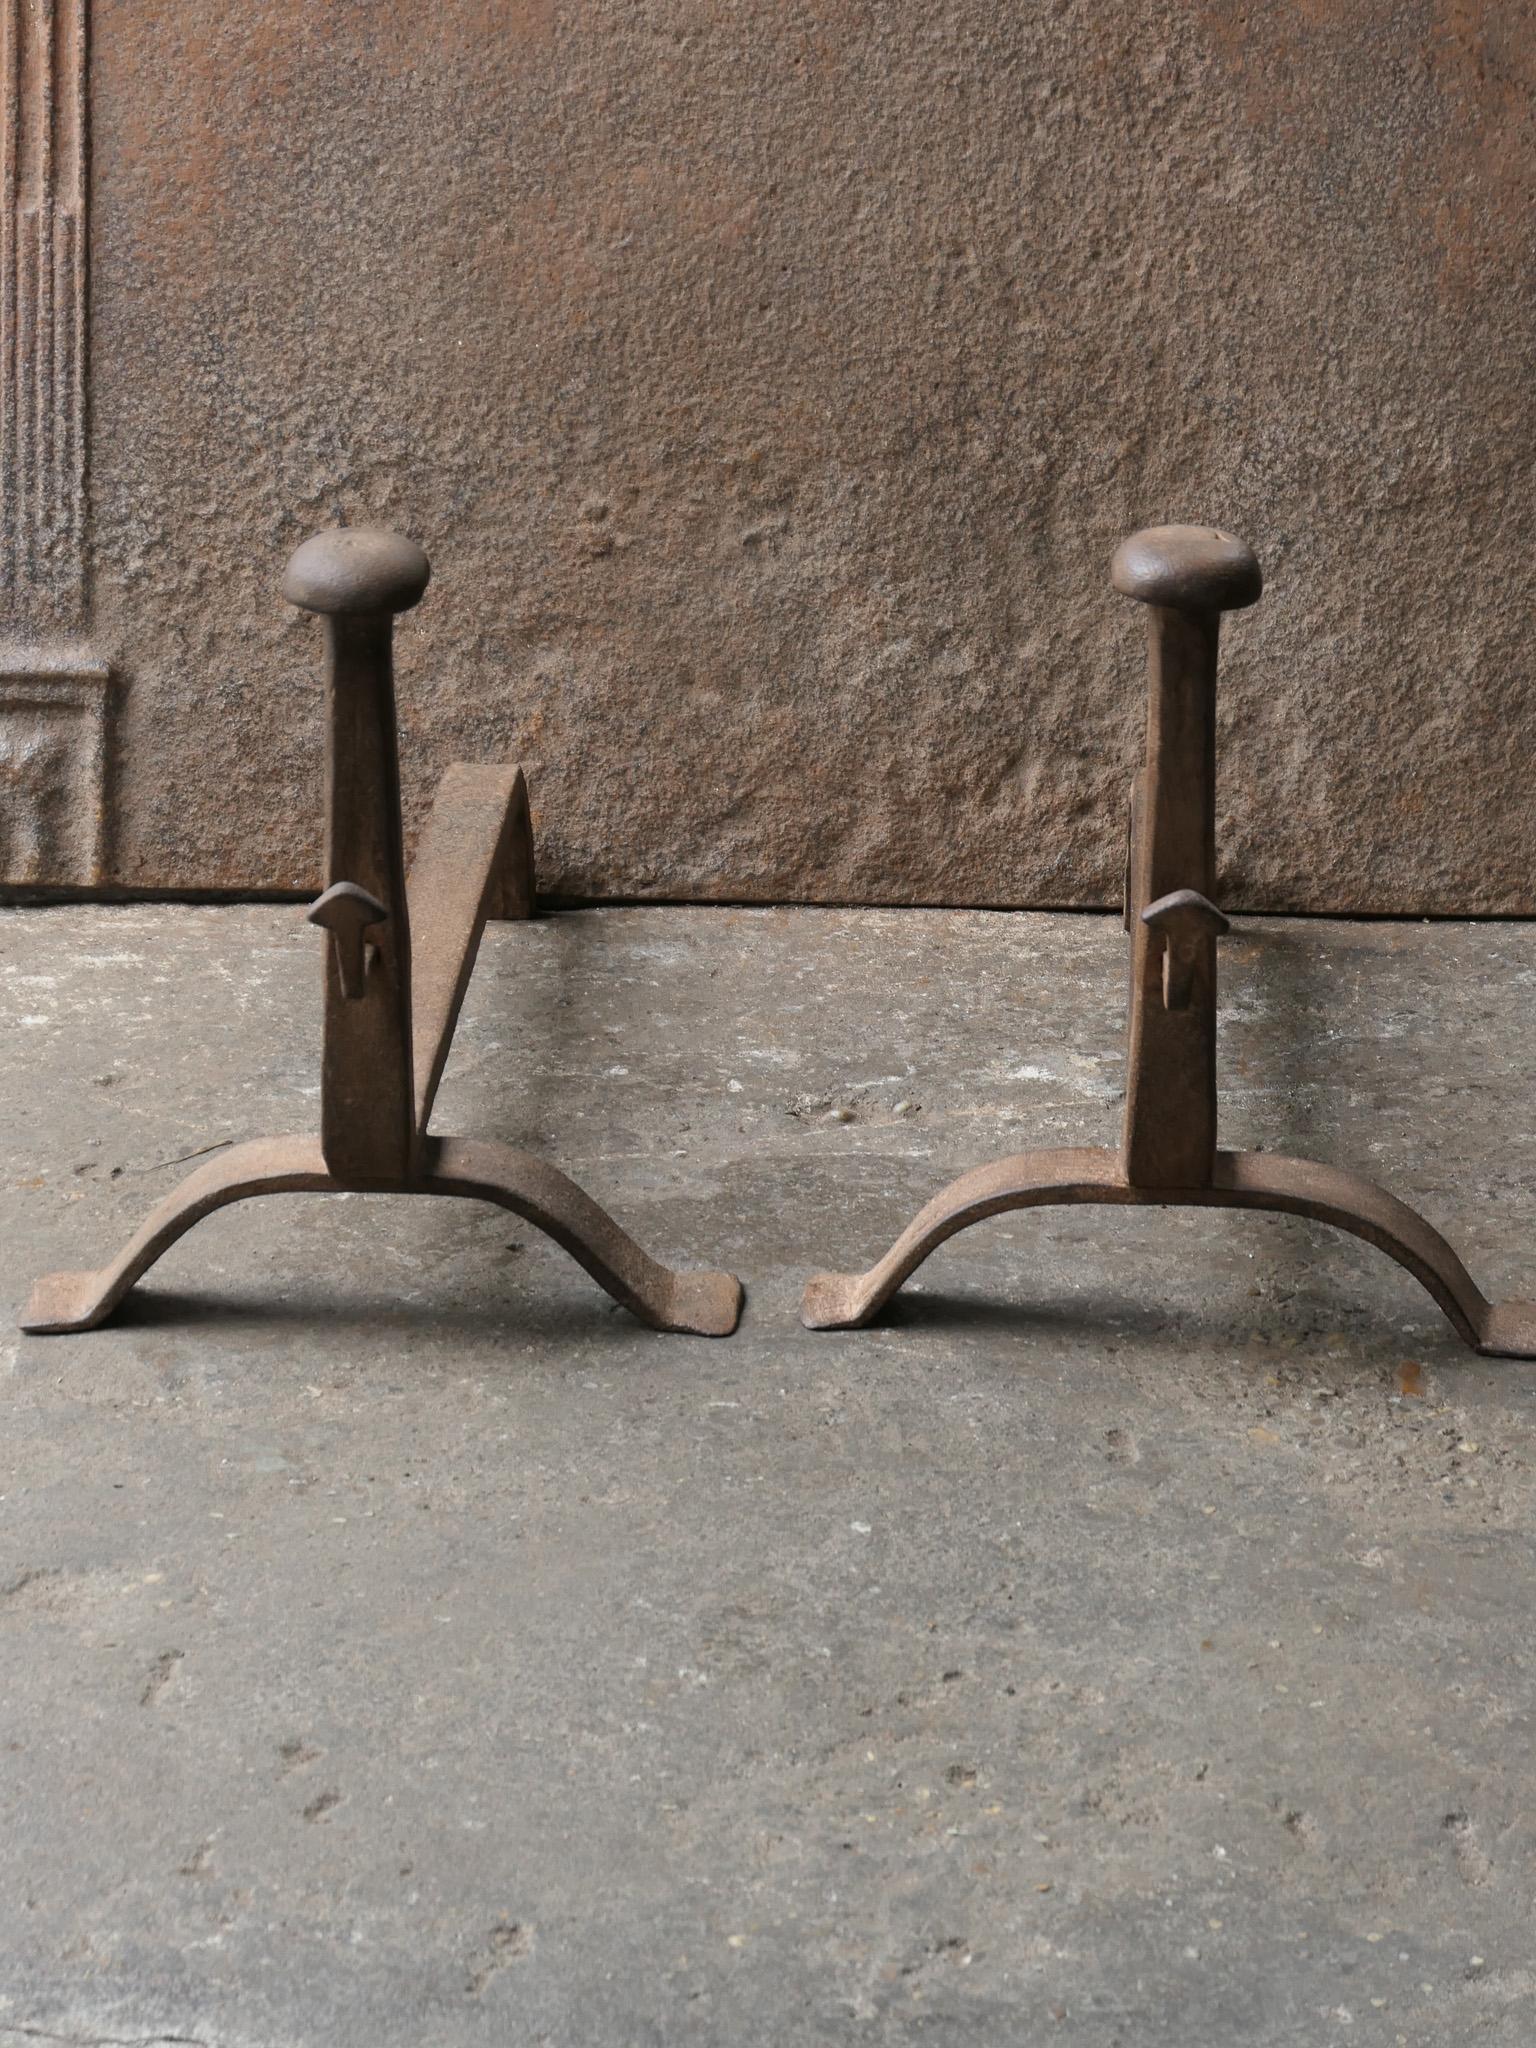 19th century French Napoleon III fireplace andirons or fire dogs, made of wrought iron. The andirons are in a good condition and are fully functional.